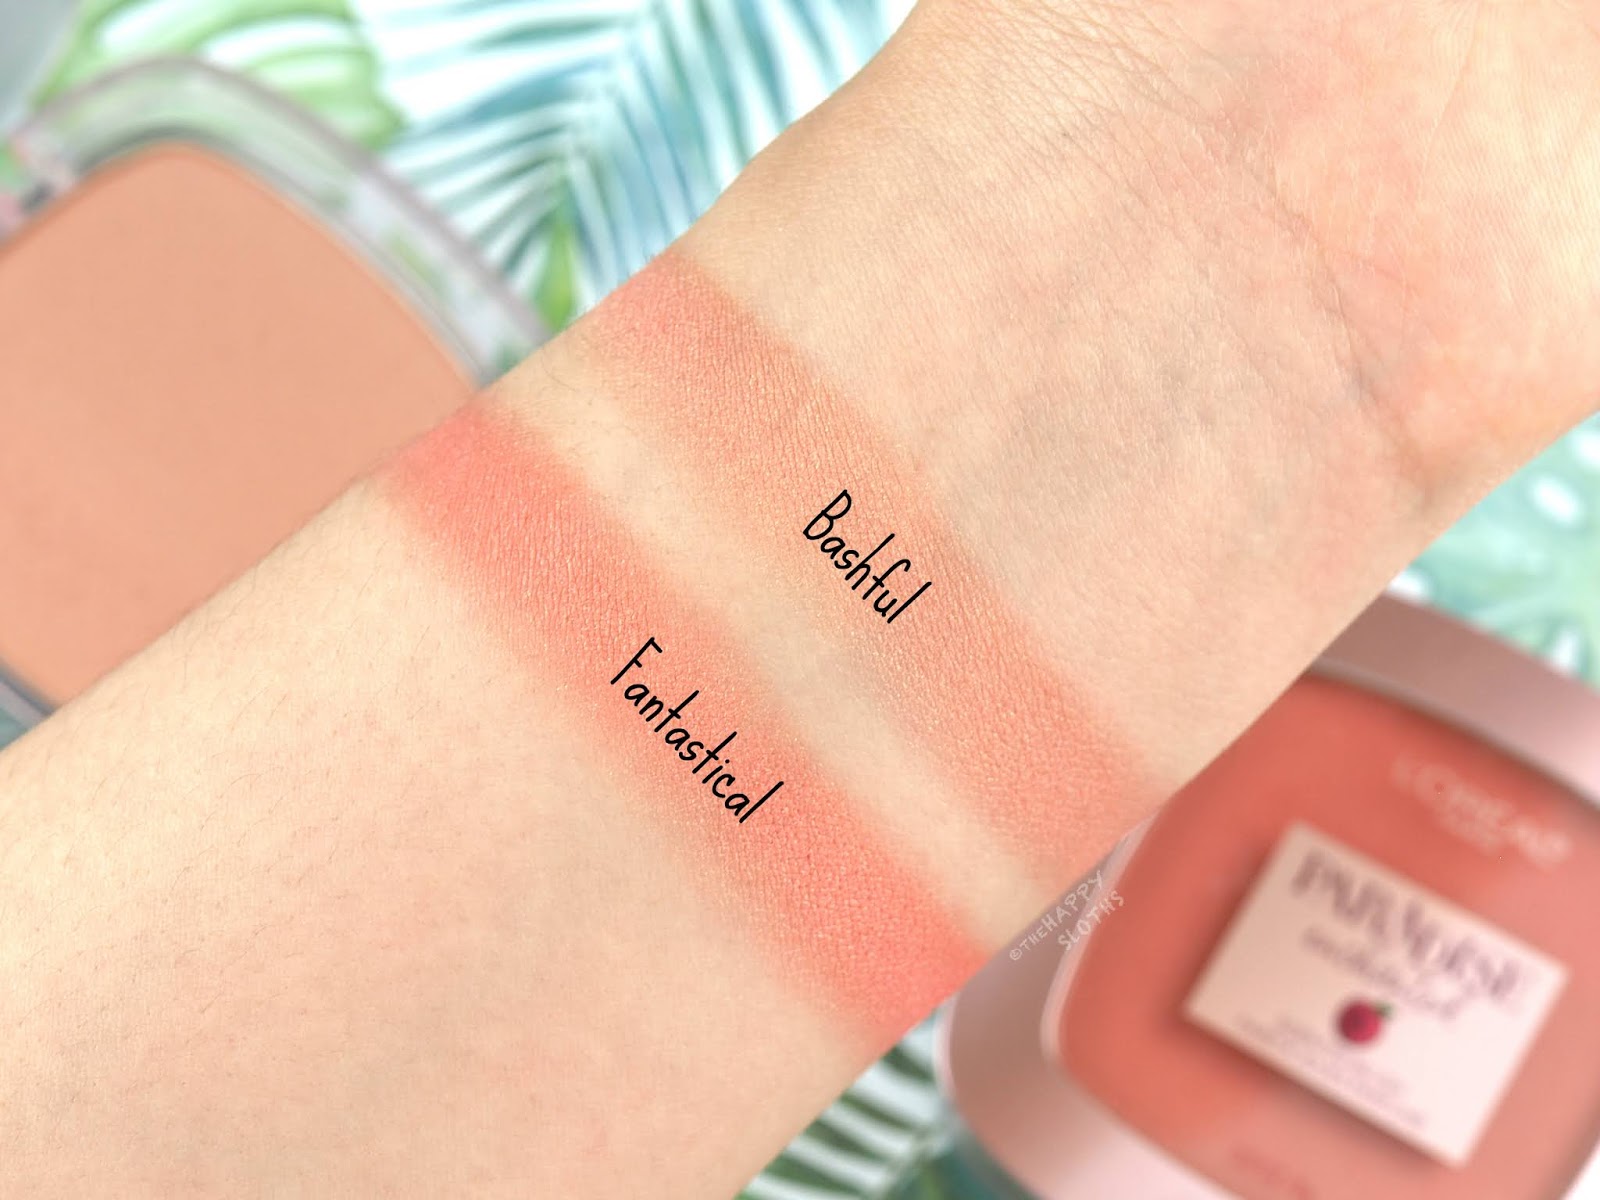 L'Oreal | Paradise Enchanted Fruit-Scented Blush in "Bashful" & "Fantastical": Review and Swatches